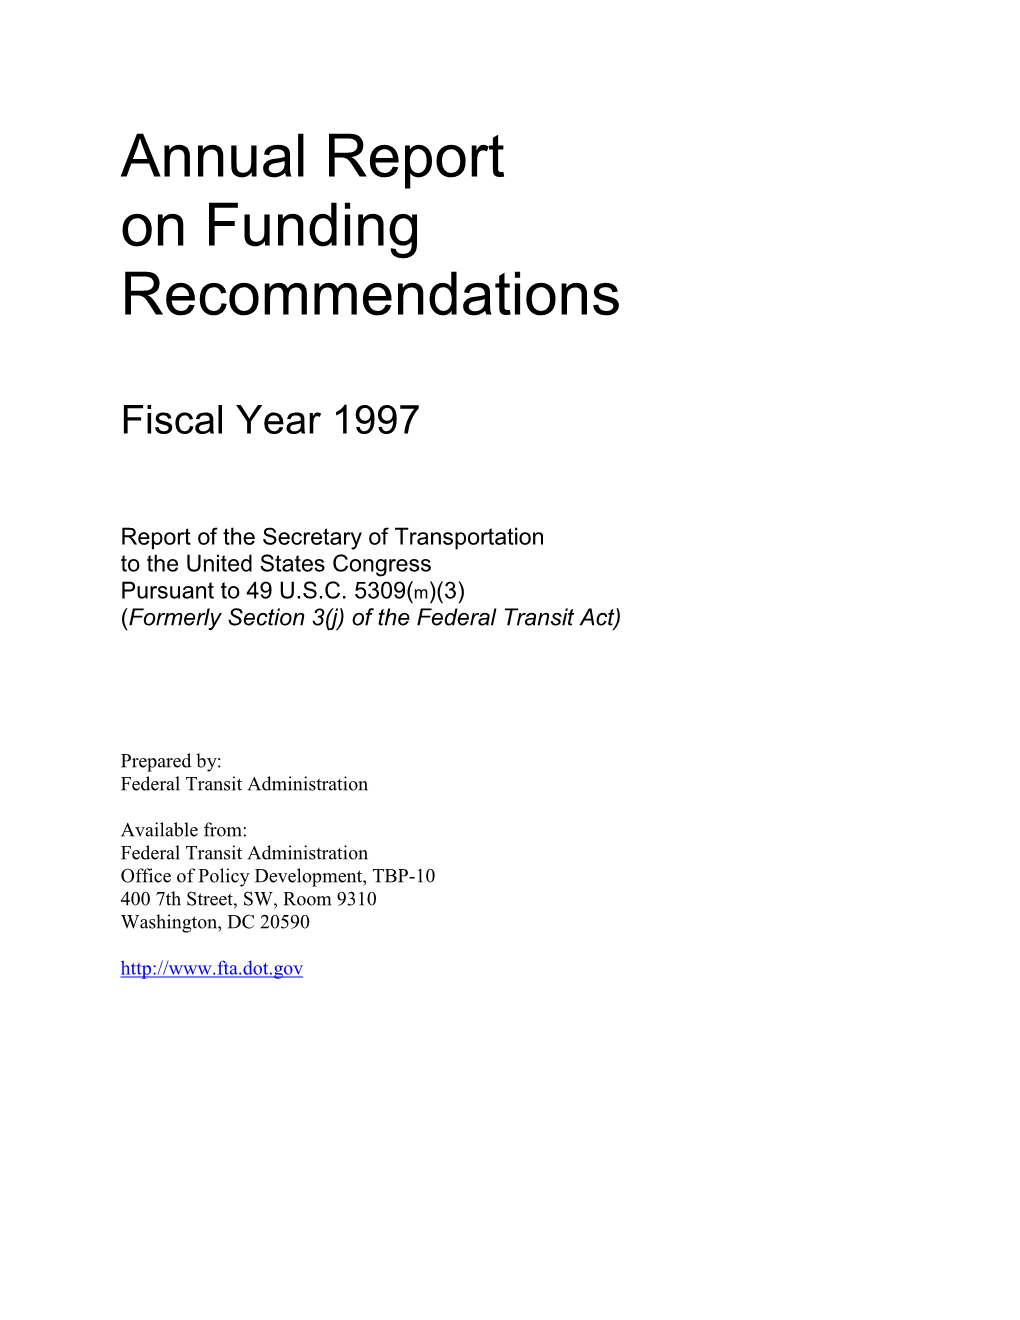 Annual Report on Funding Recommendations Fiscal Year 1997